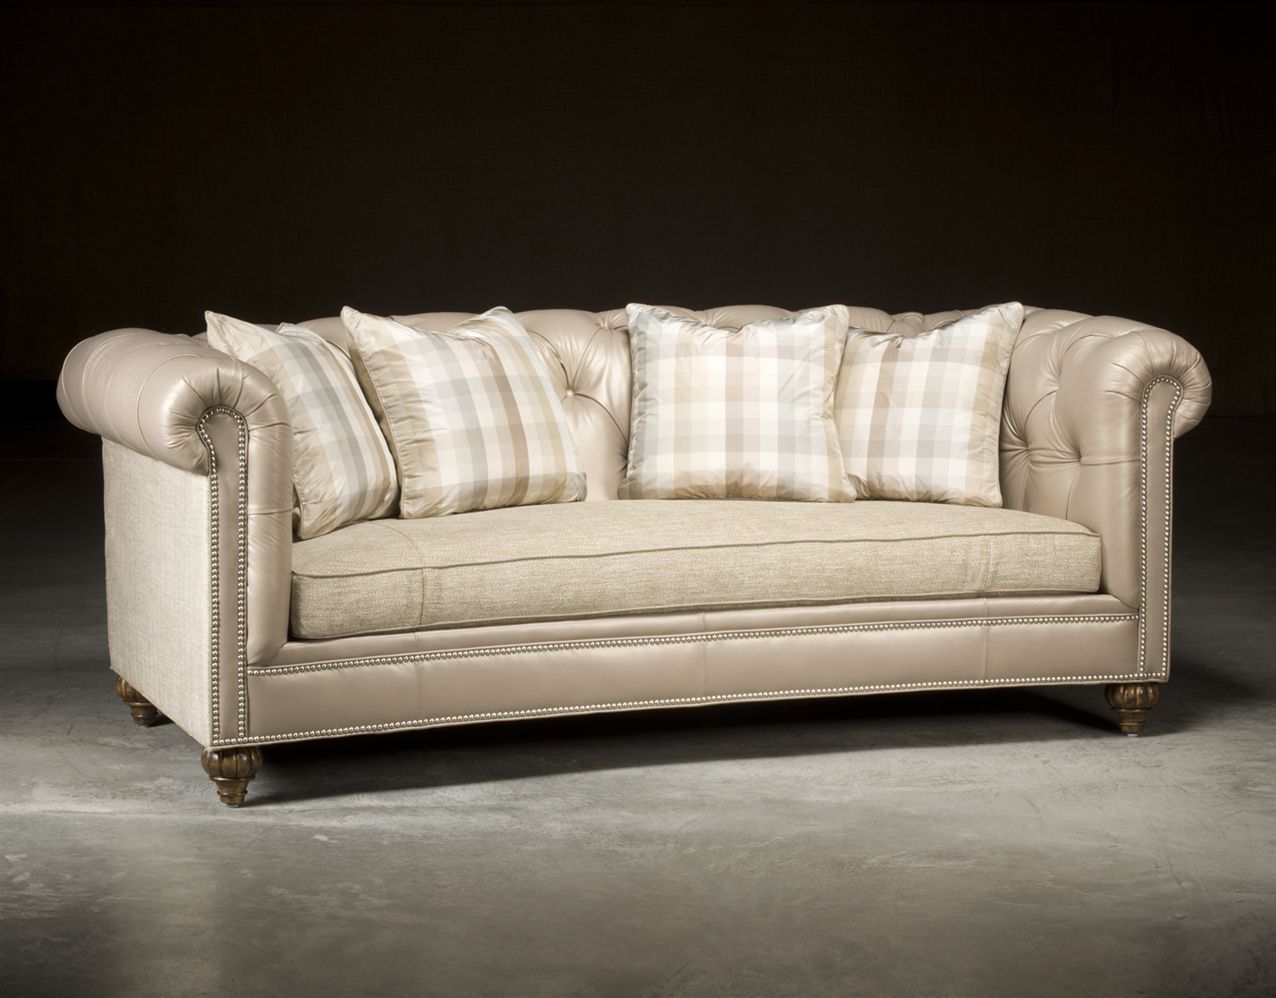 Chesterfield Tufted Sofa, High End Upholstered Furniture Inside Tufted Upholstered Sofas (Gallery 10 of 20)